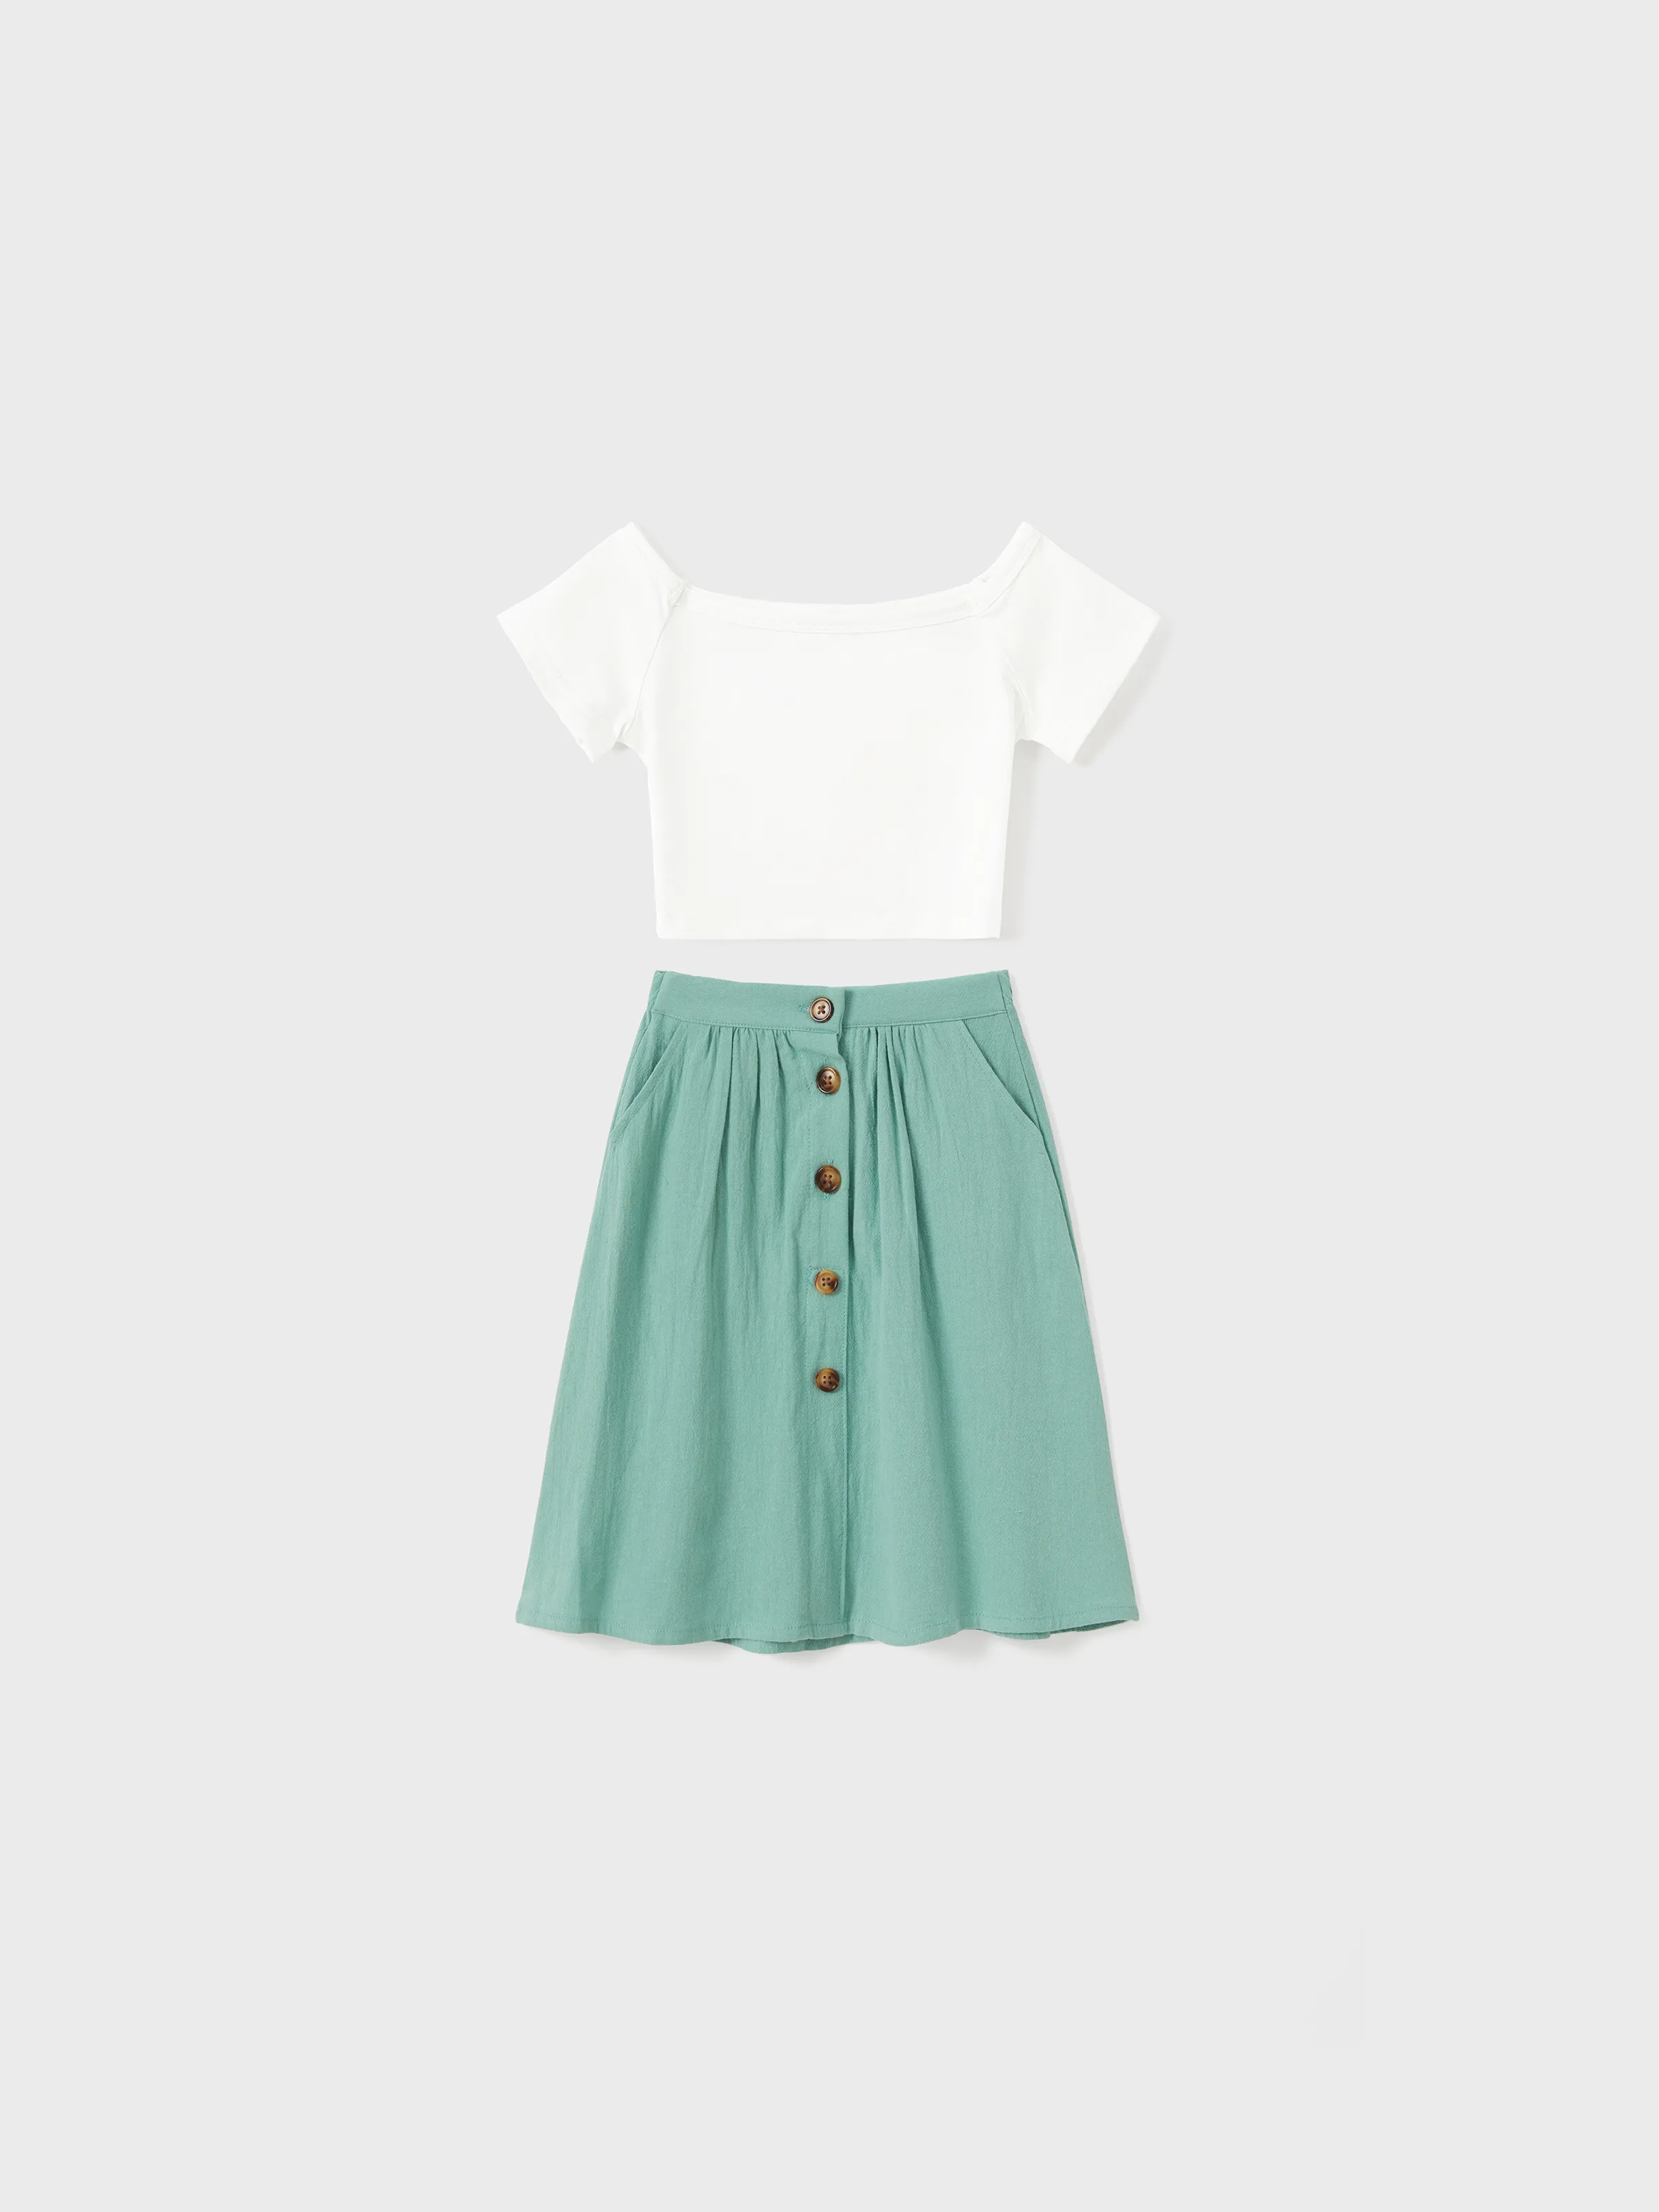 

Family Matching Sets Slogan Tee or White Top Mint Green Button Skirt with Pockets Co-ord Sets